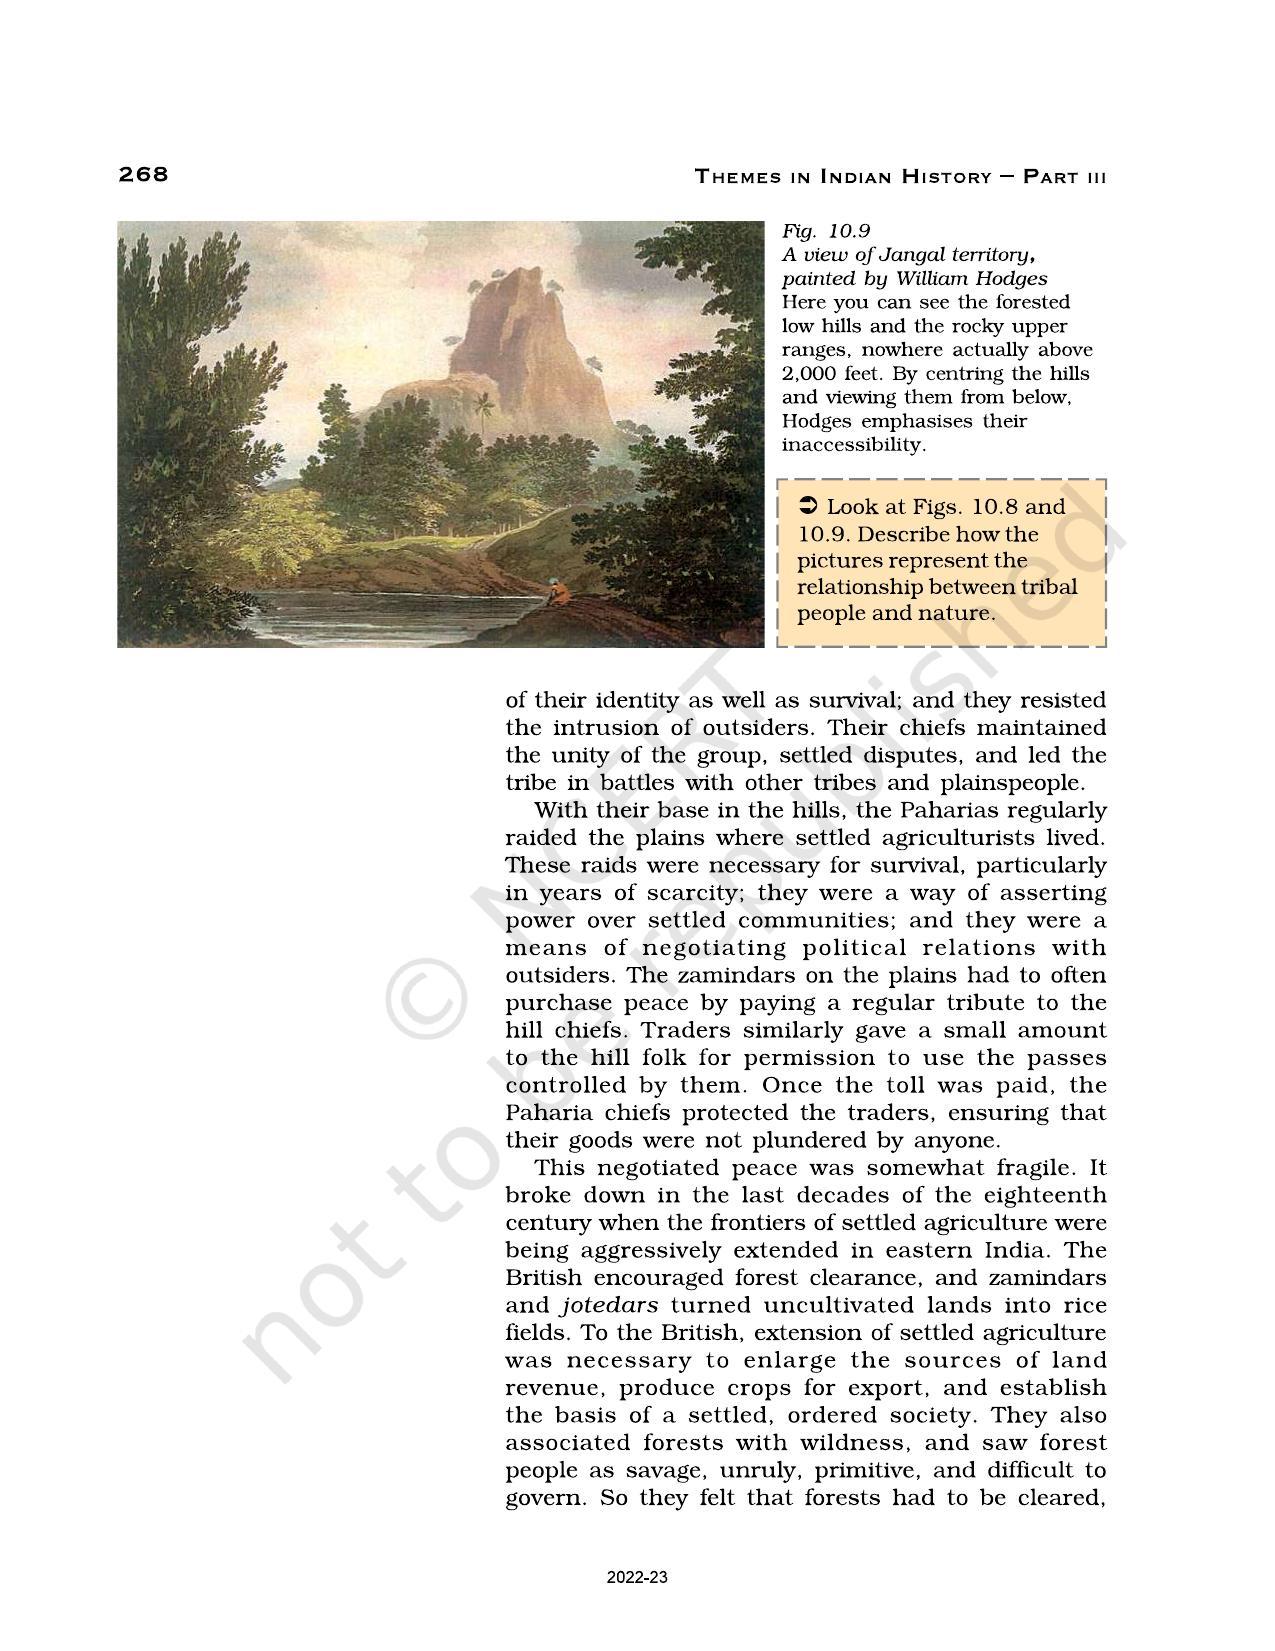 NCERT Book for Class 12 History (Part-II) Chapter 10 Colonialism and the Countryside - Page 12